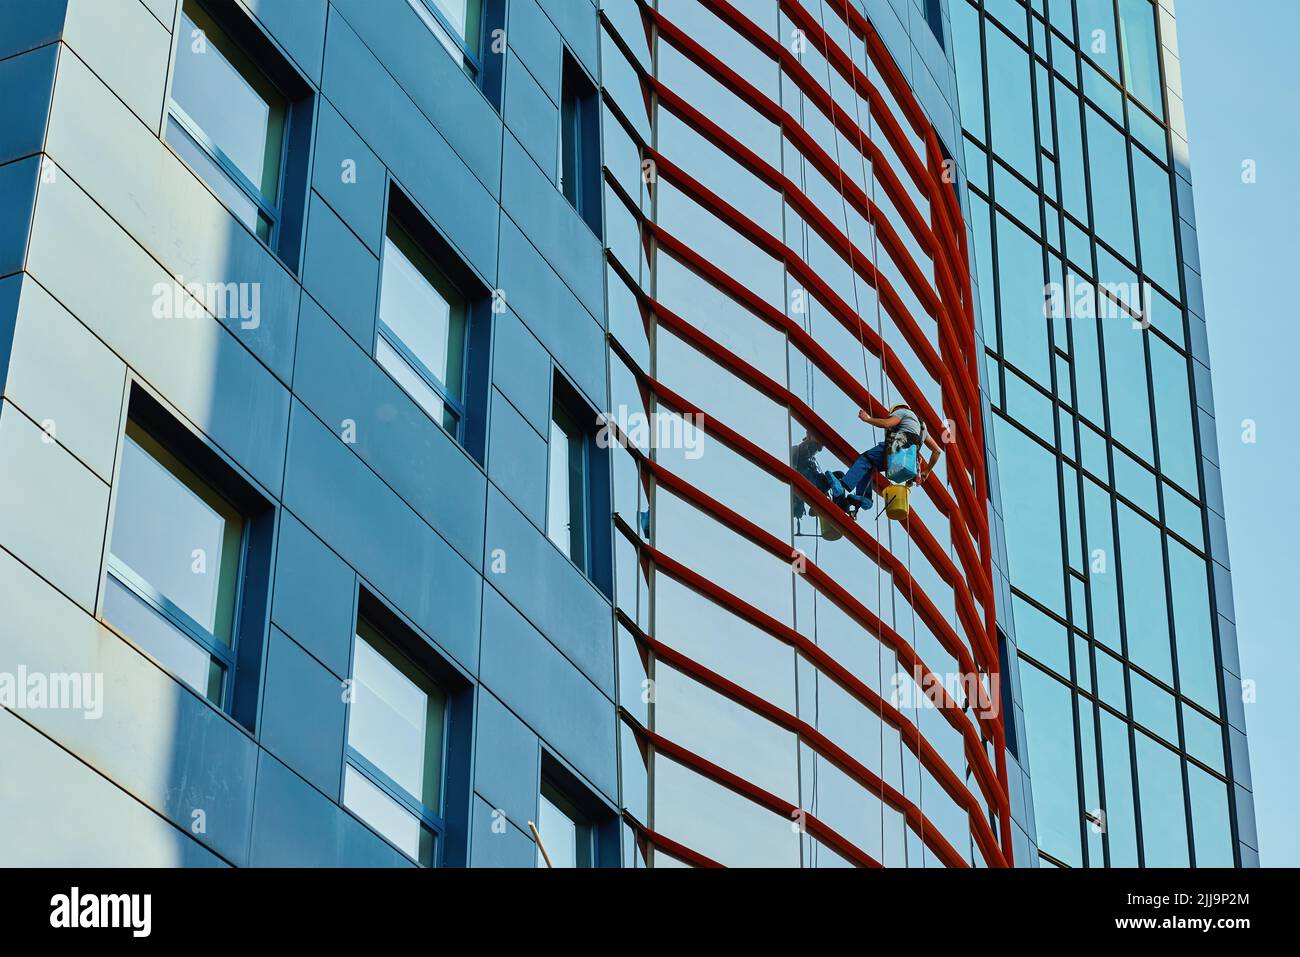 Two workers cleaning window in business center, Industrial alpinists washing exterior of skyscraper, Dangerous risky work at height, Cleaning service Stock Photo